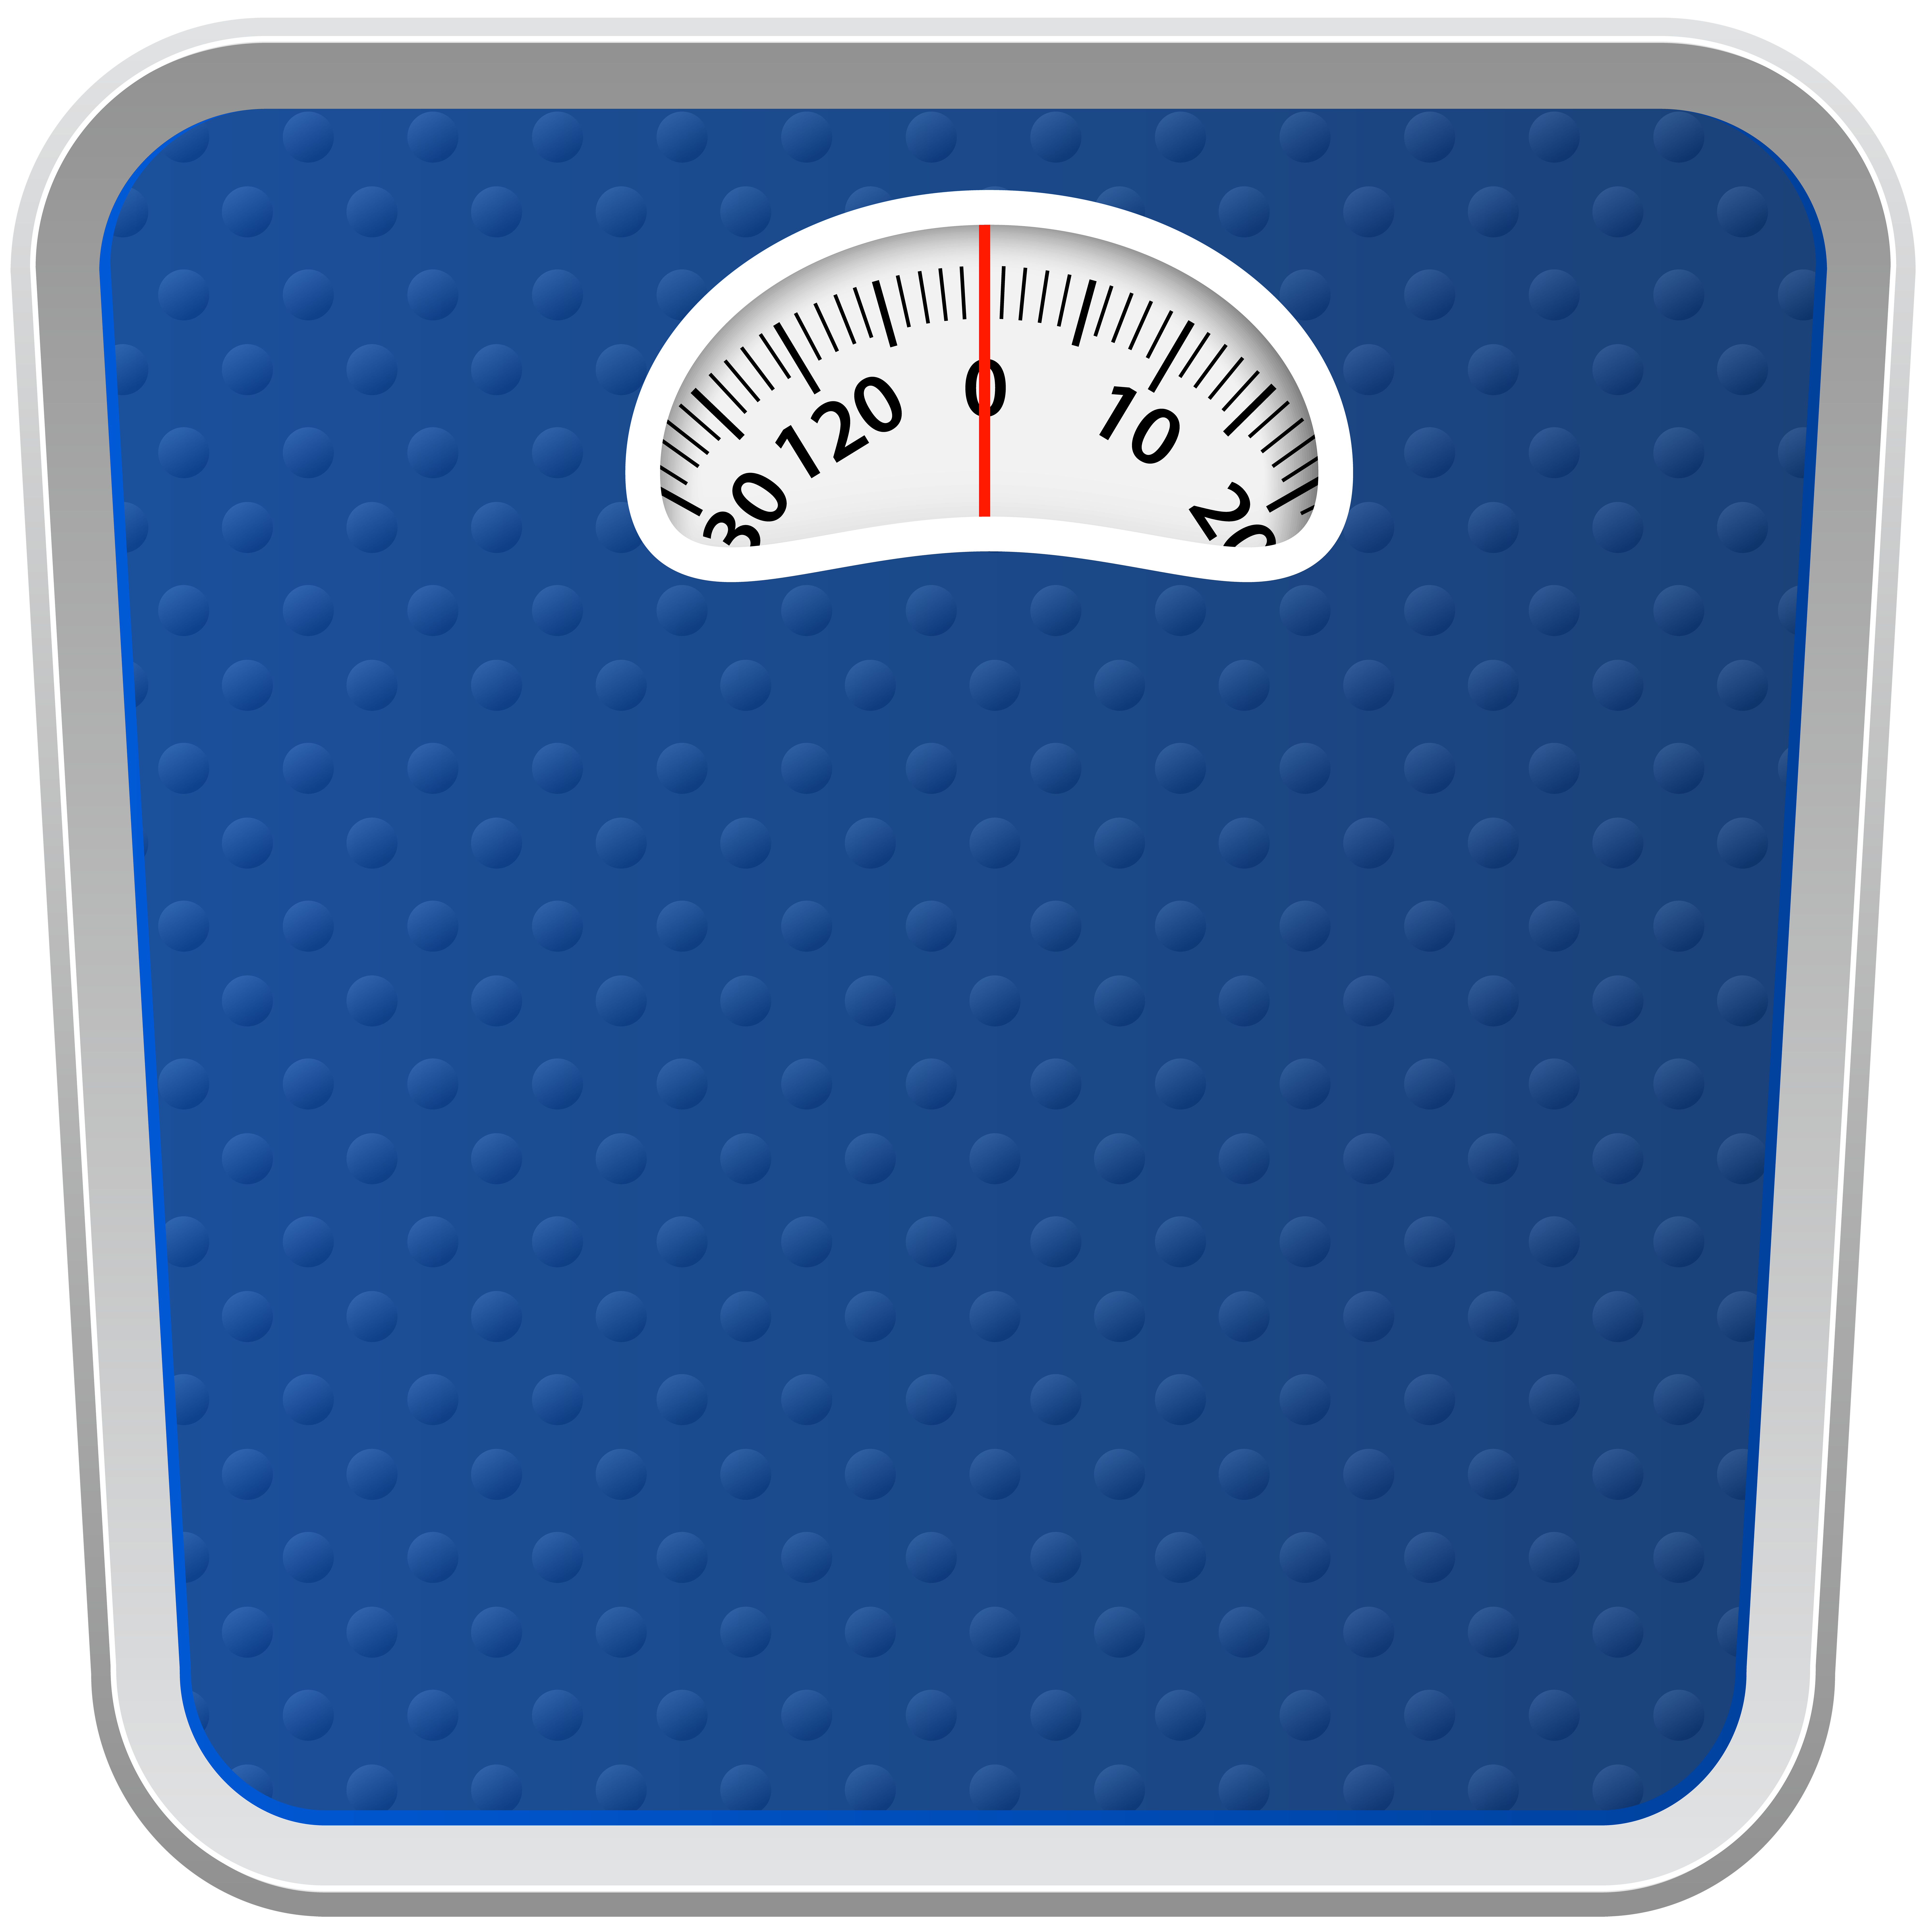 Scale Clip Art | Measuring Weight